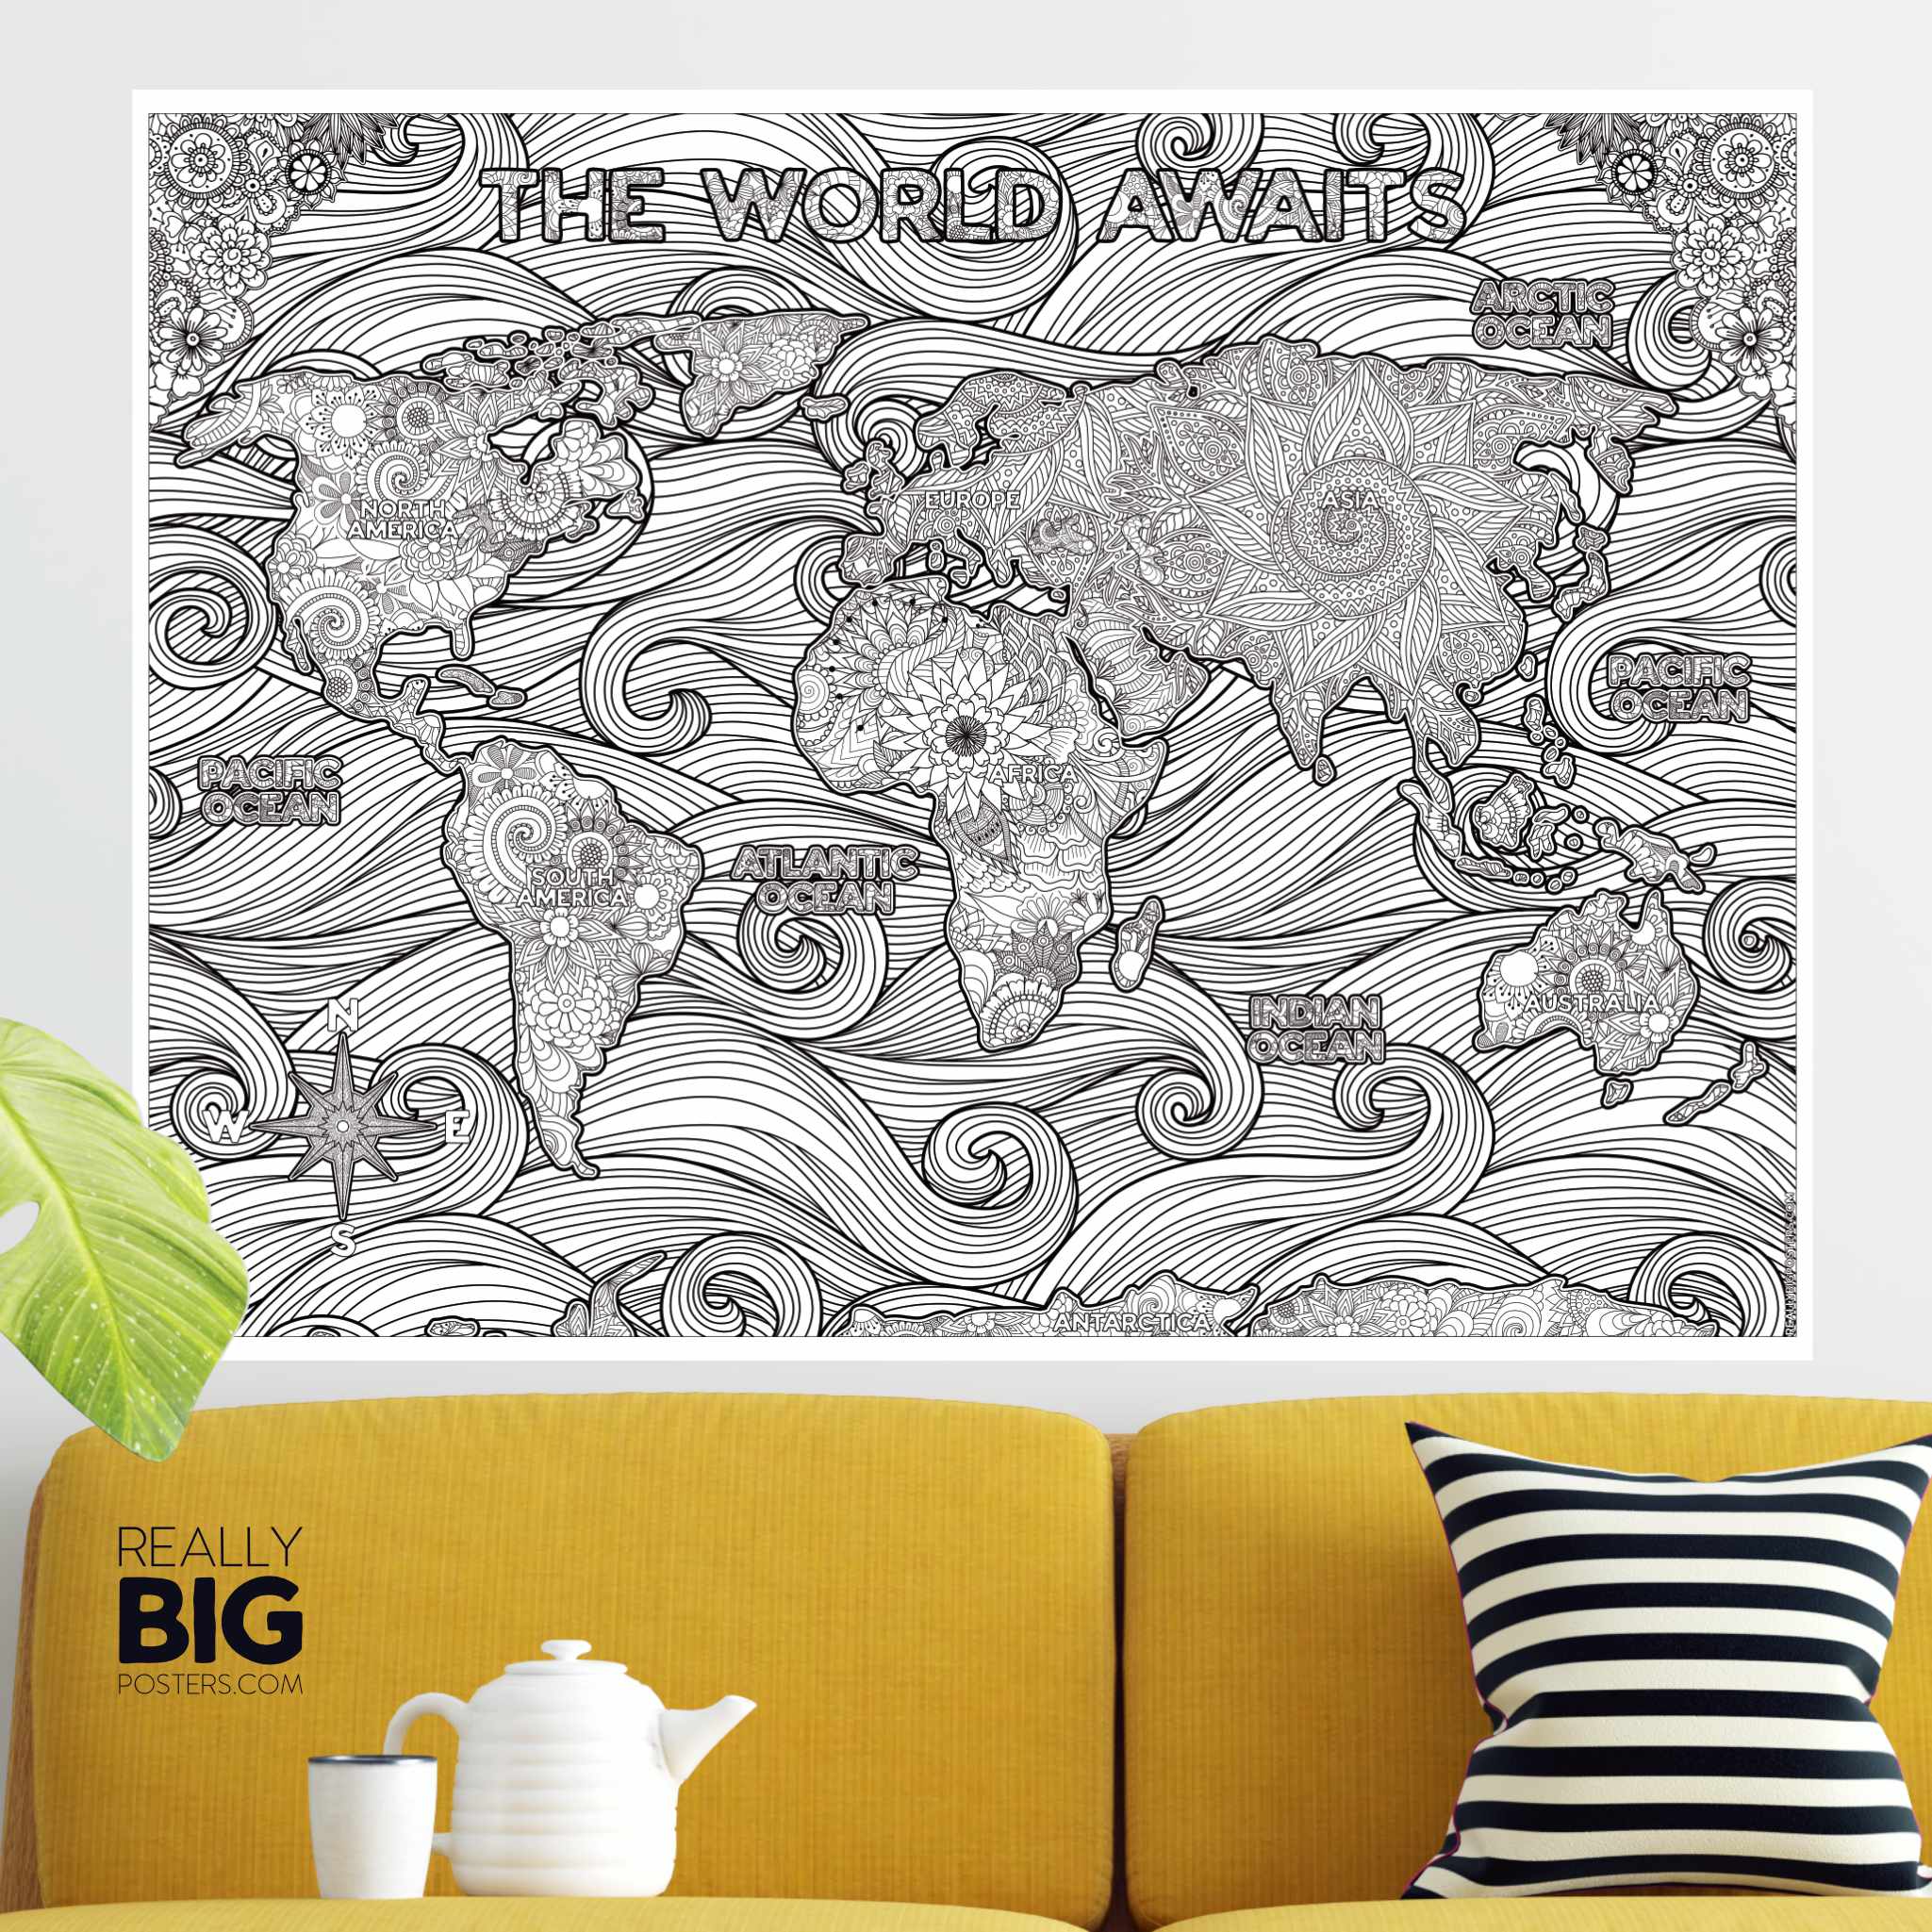 Kids World Map Coloring Poster - 35 x 52 Inch Giant Coloring Poster for  Kids